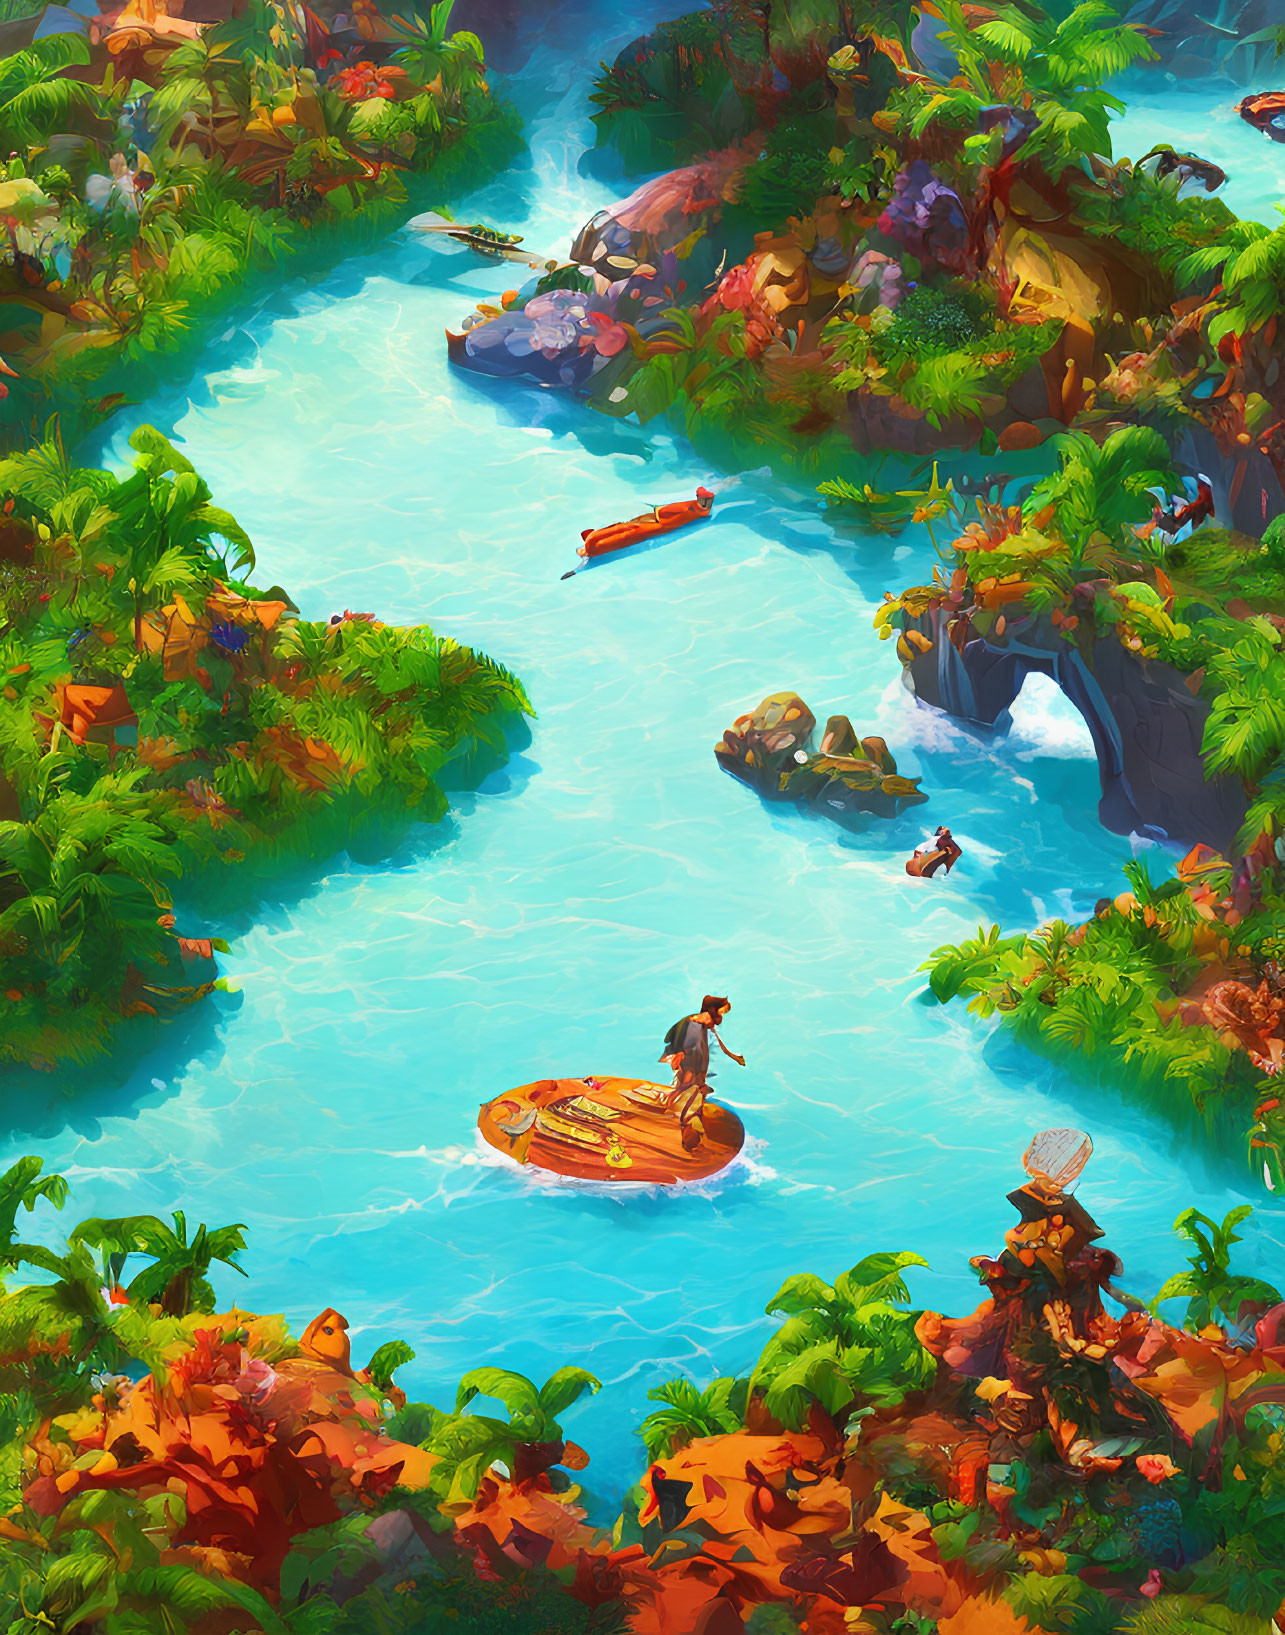 Tropical river scene with rafts, lush vegetation, and waterfalls